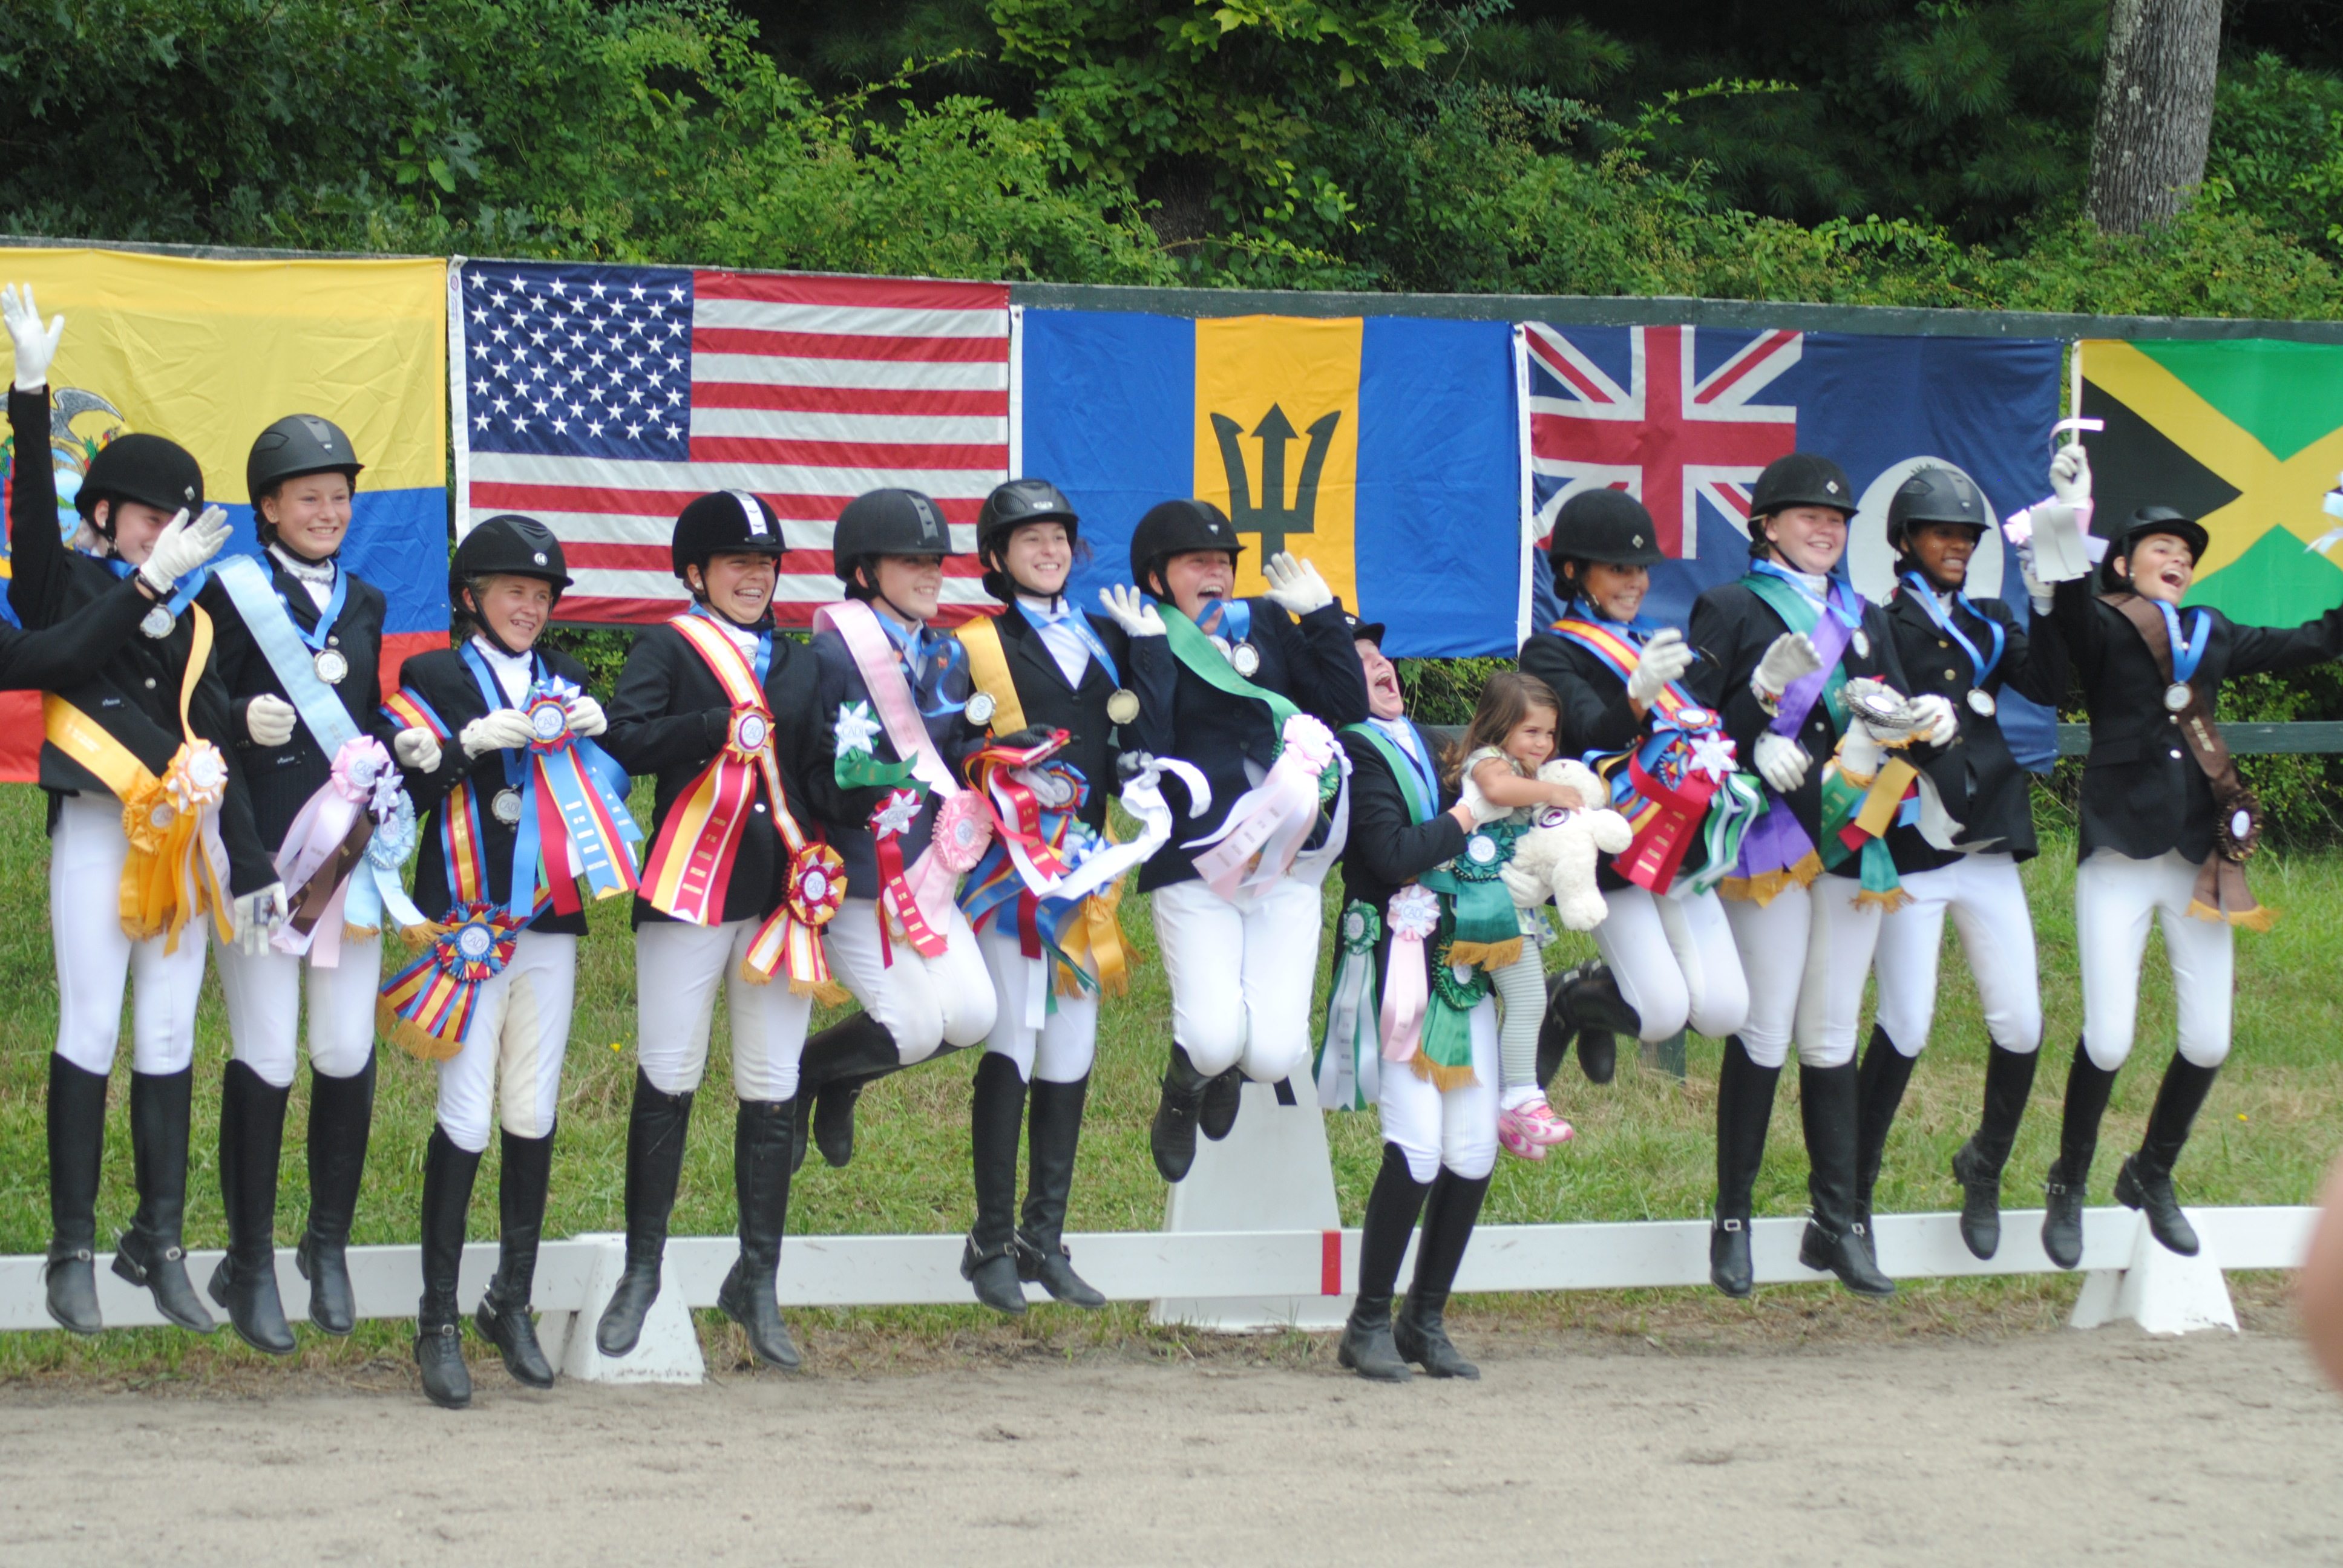 The riders pose for pictures together after the awards ceremony with their flags. This year riders from Barbados, Bermuda, Canada, Cayman Islands, Ecuador, Jamaica, Trinidad and Tobago and the United States came for CADI.